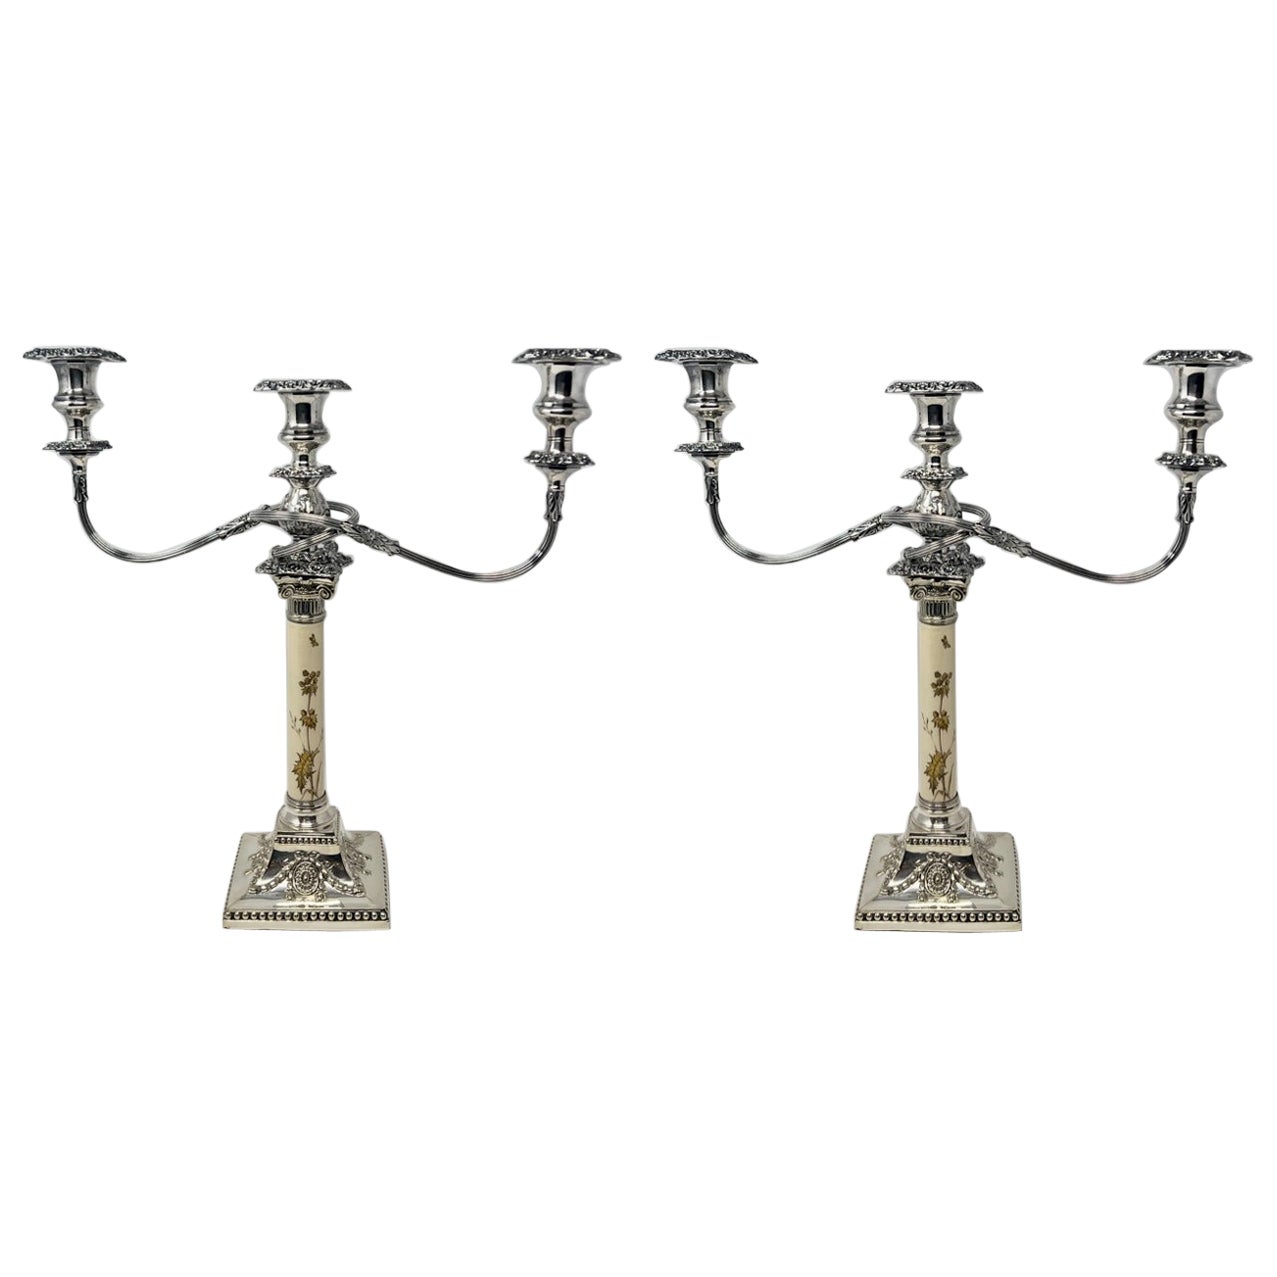 Pair Estate English Aesthetic Movement Silver-Plated Candlesticks Circa 1950-60. For Sale